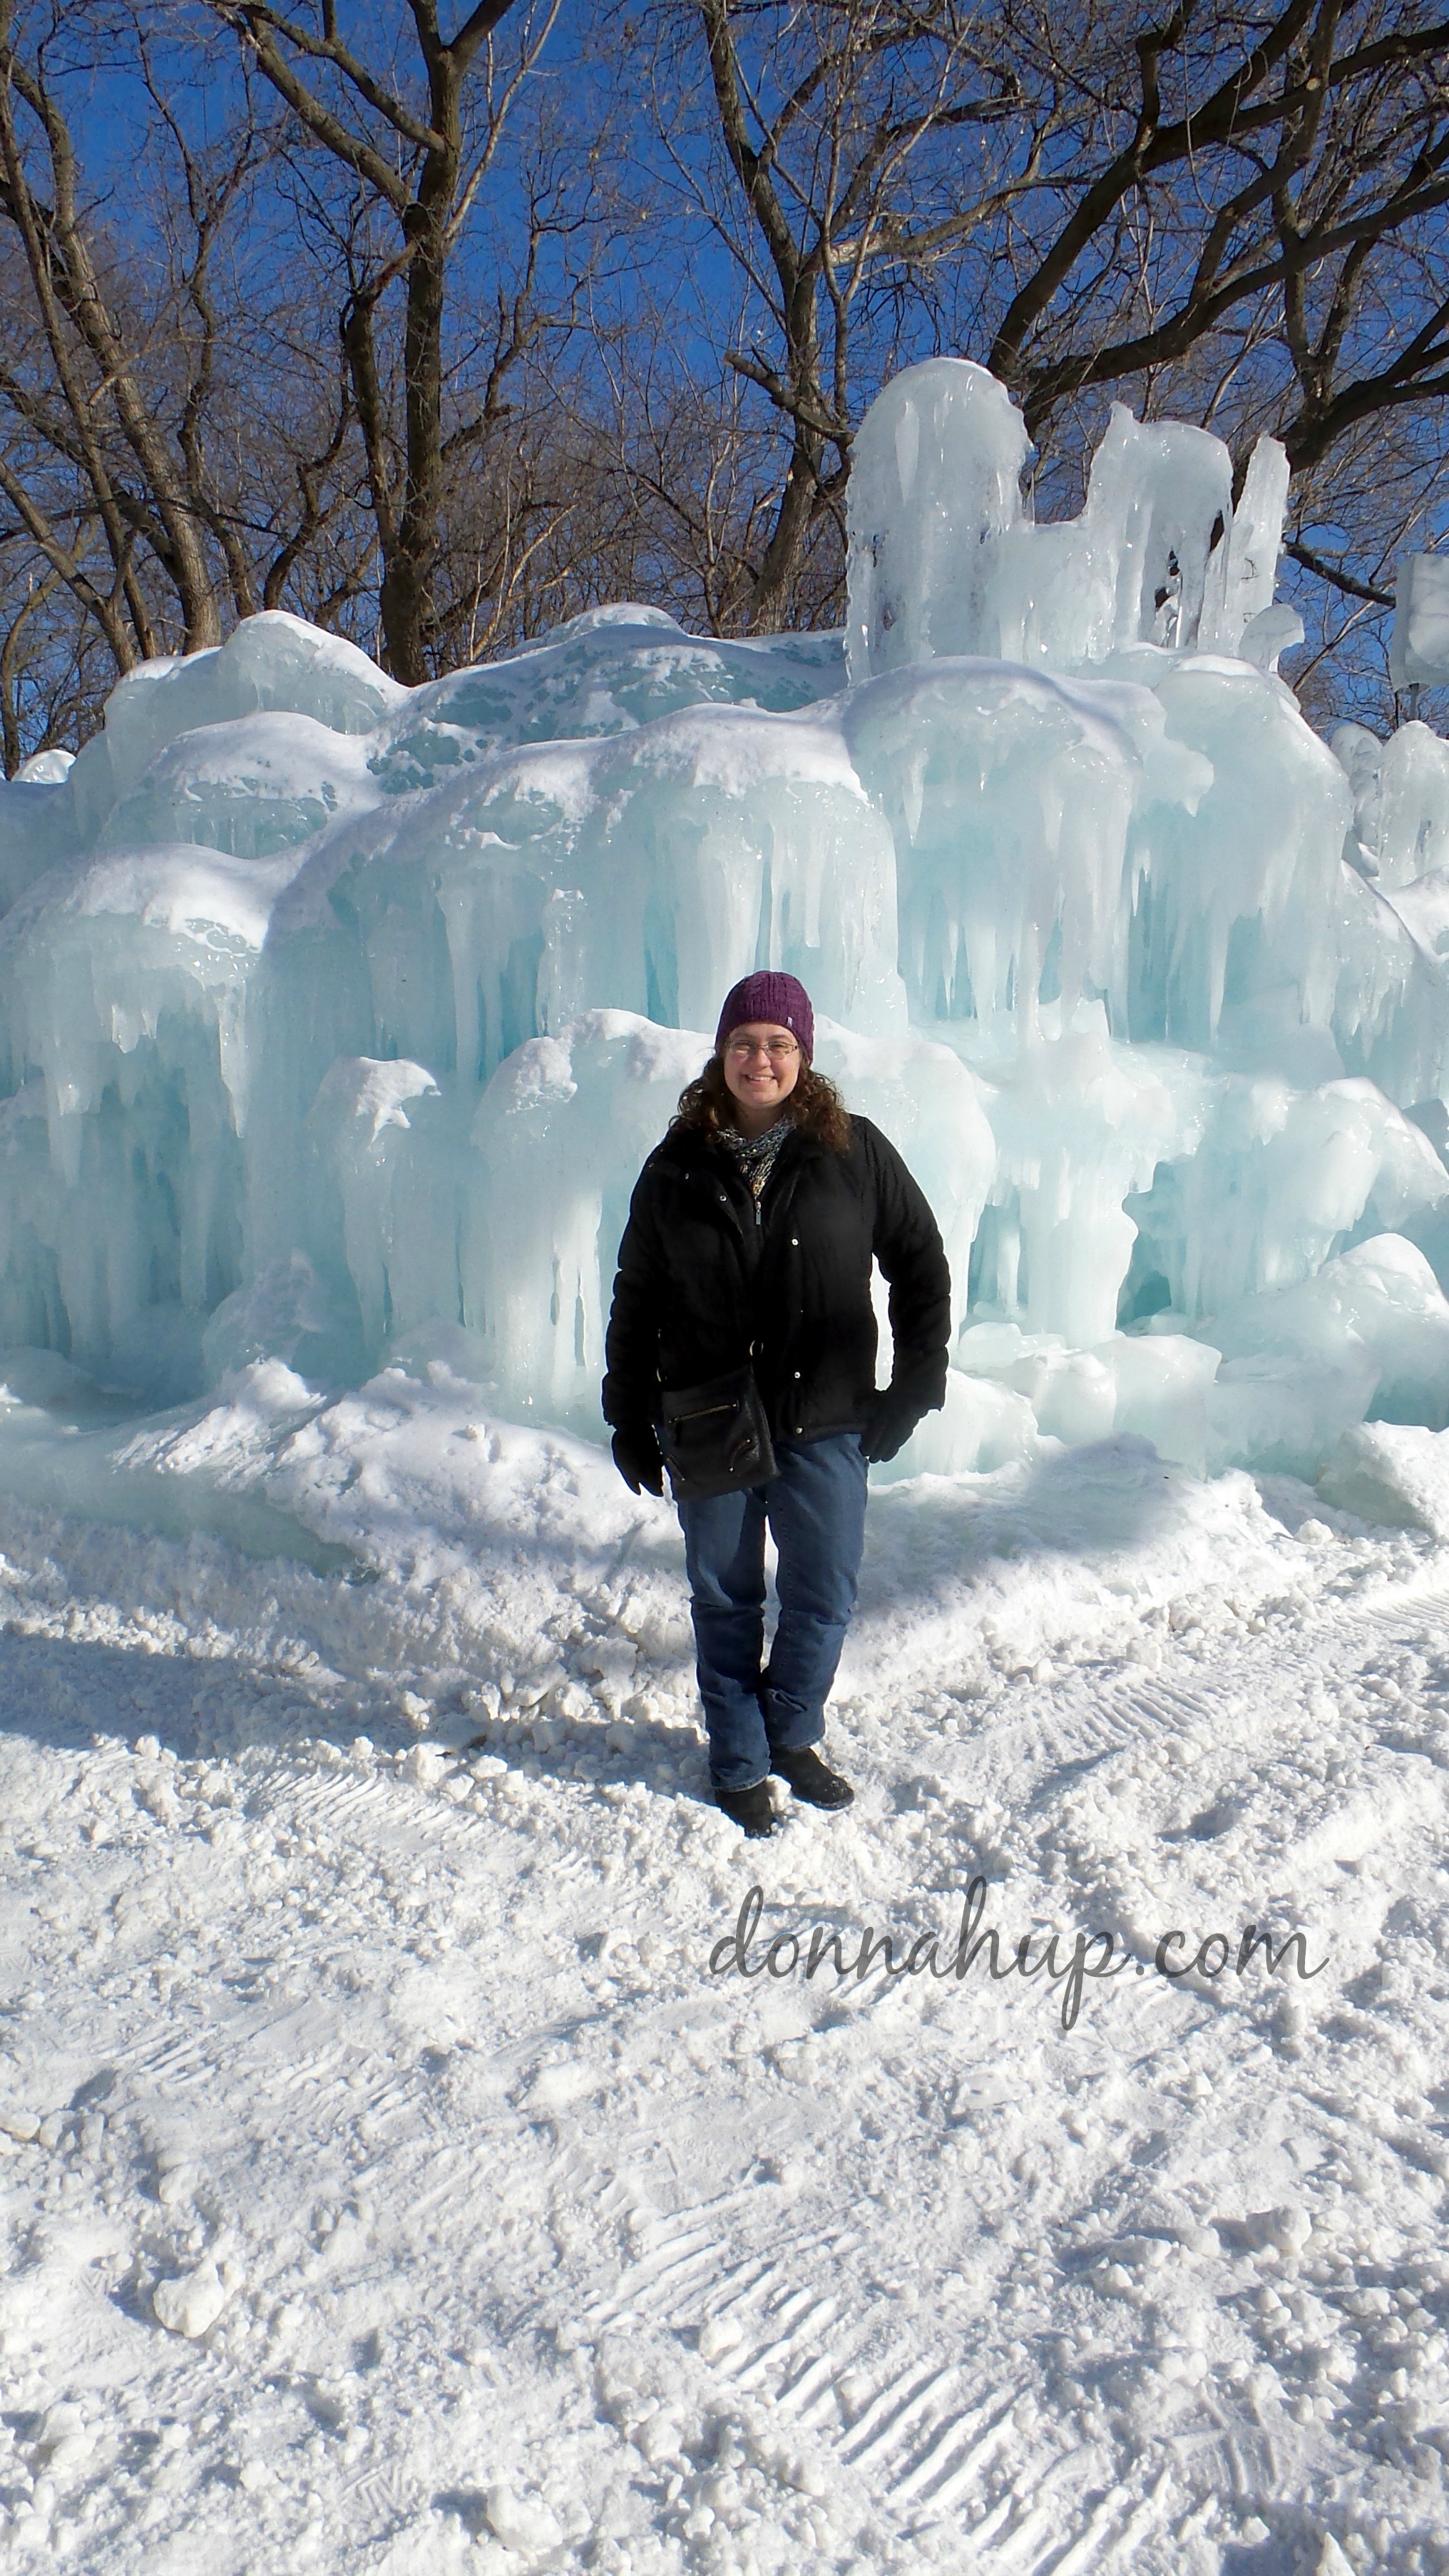 A Magical Day at the Ice Castles